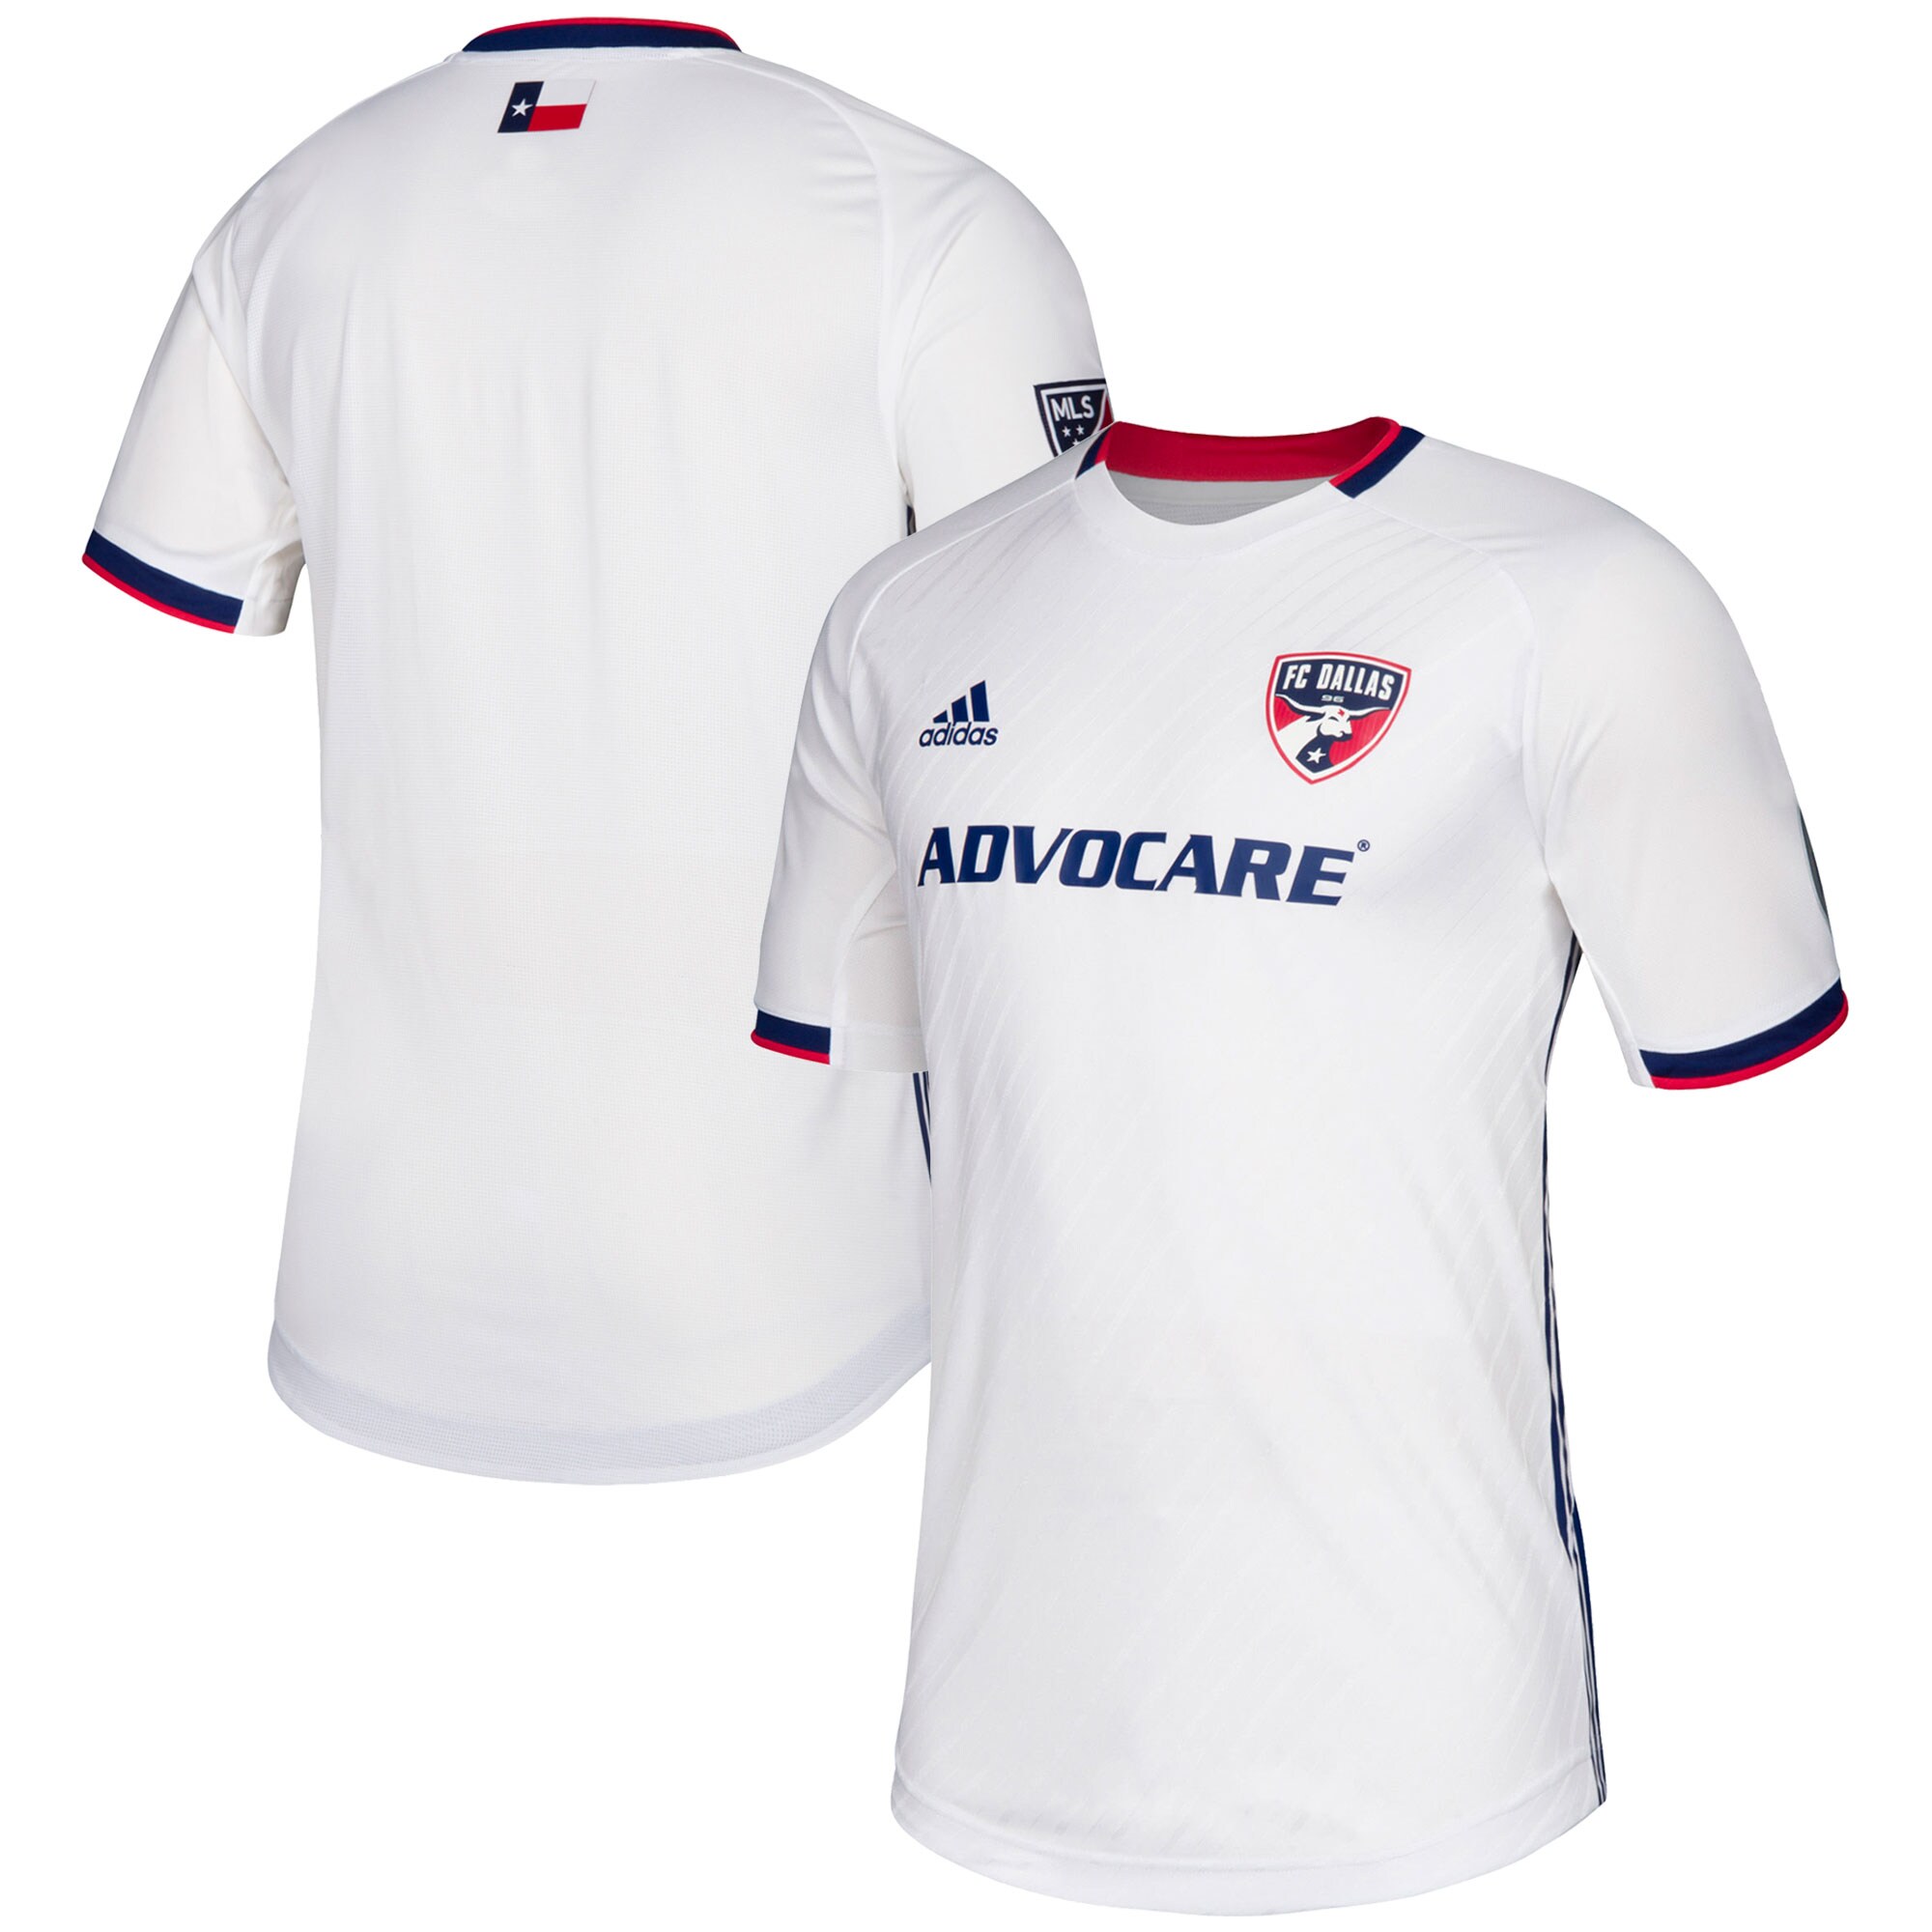 Updating the FC Dallas franchise history kit photo charts - 3rd Degree